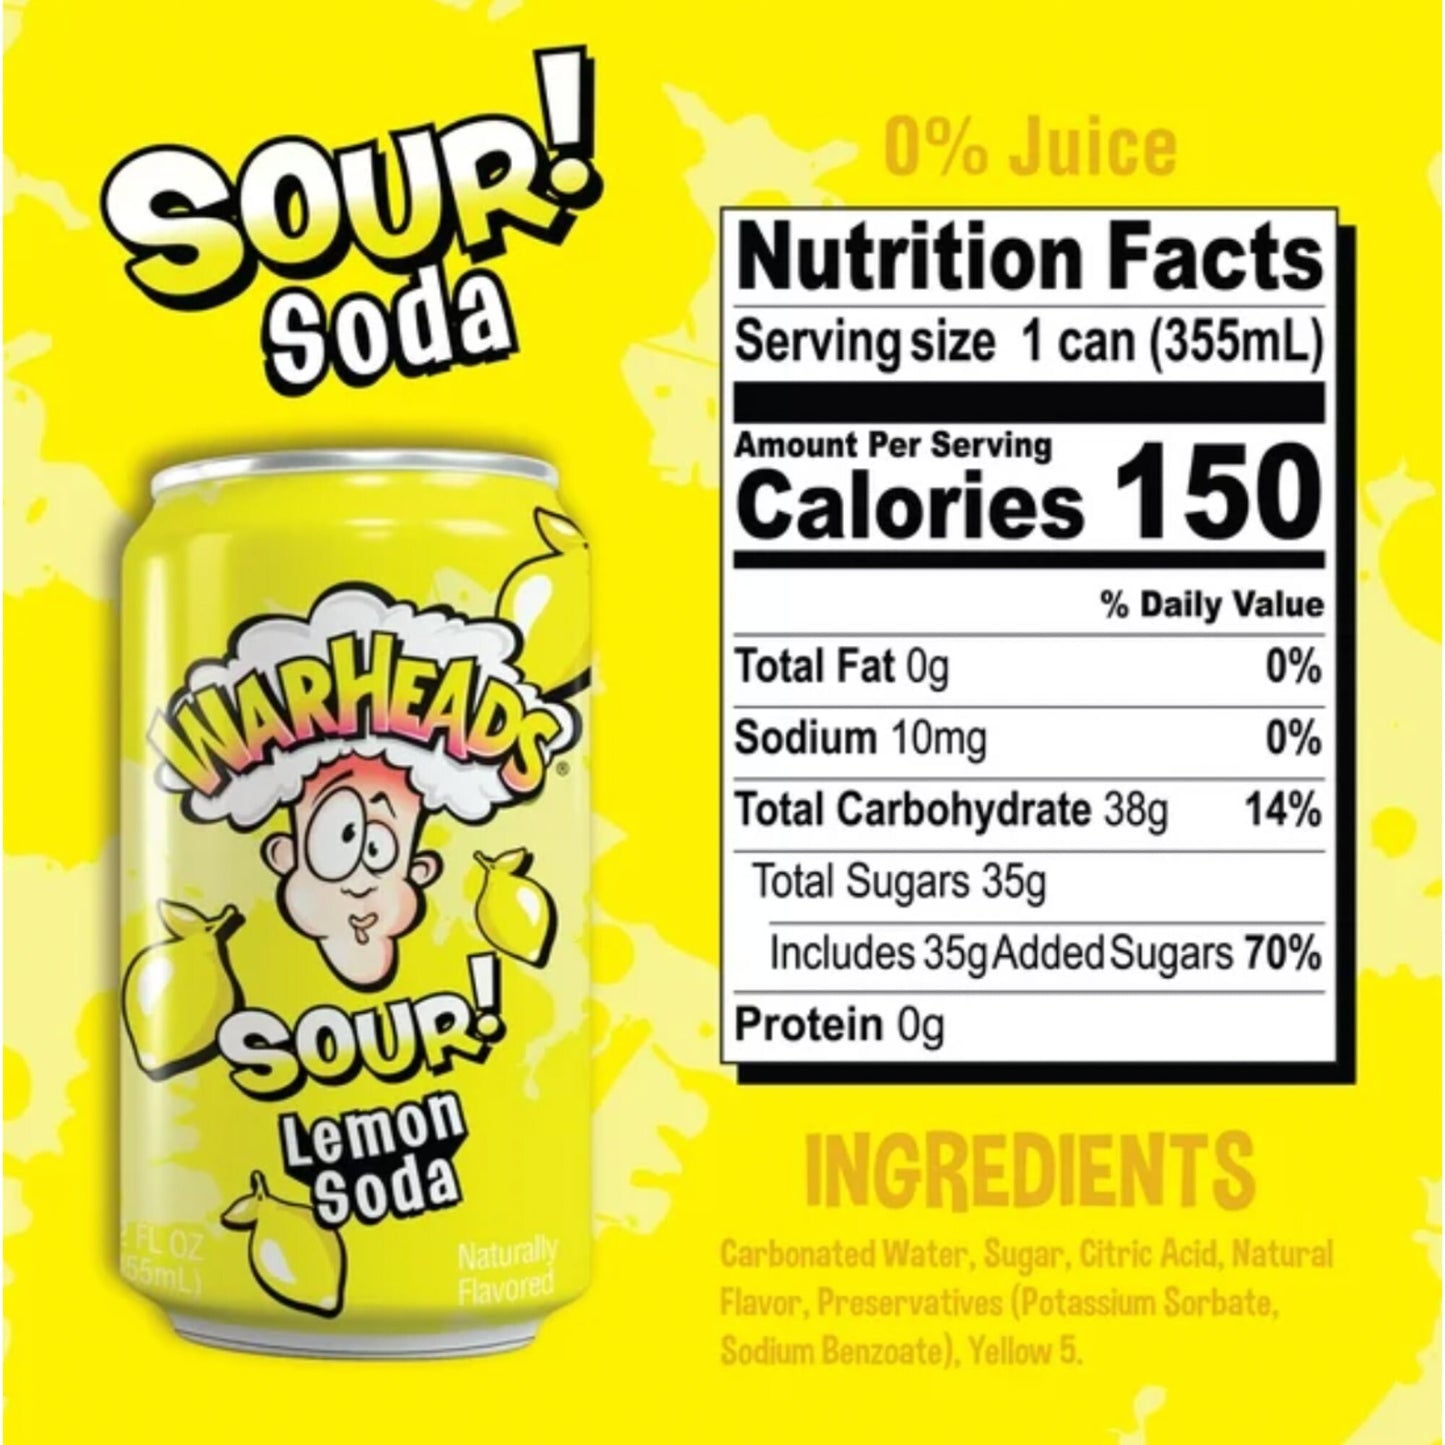 Sour Lemon Warheads Soda - Nutrition Facts and Ingredients